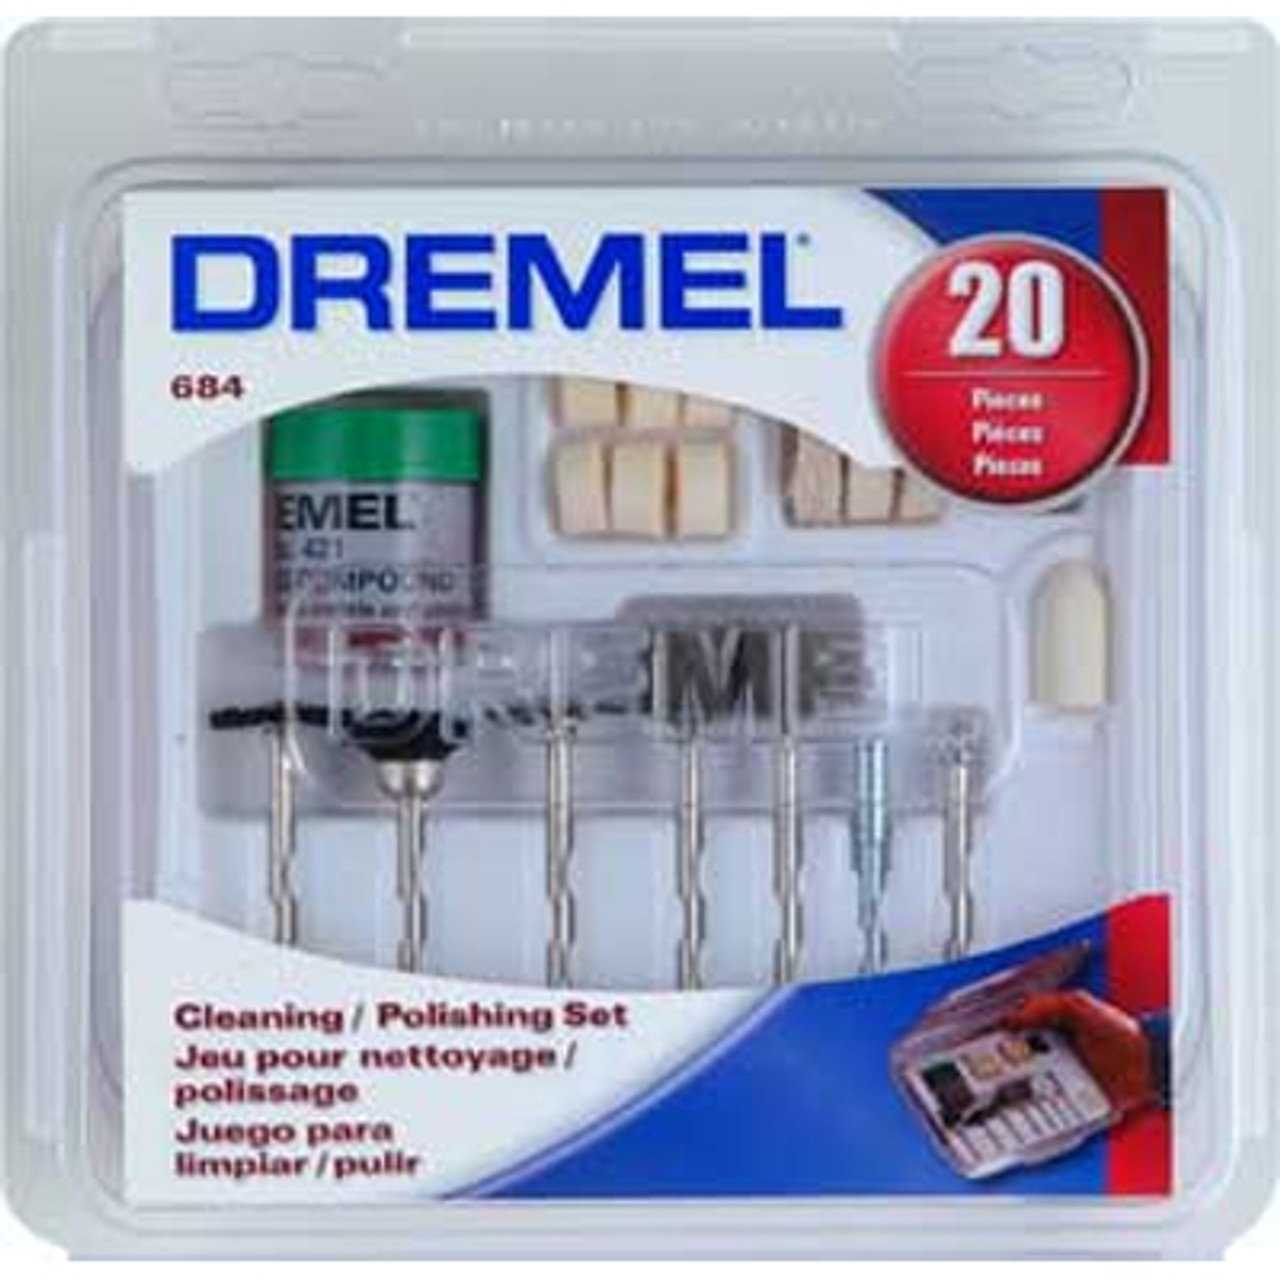 Dremel Assorted Sets - Cleaning/Polishing 20 pcs - Paxton/Patterson